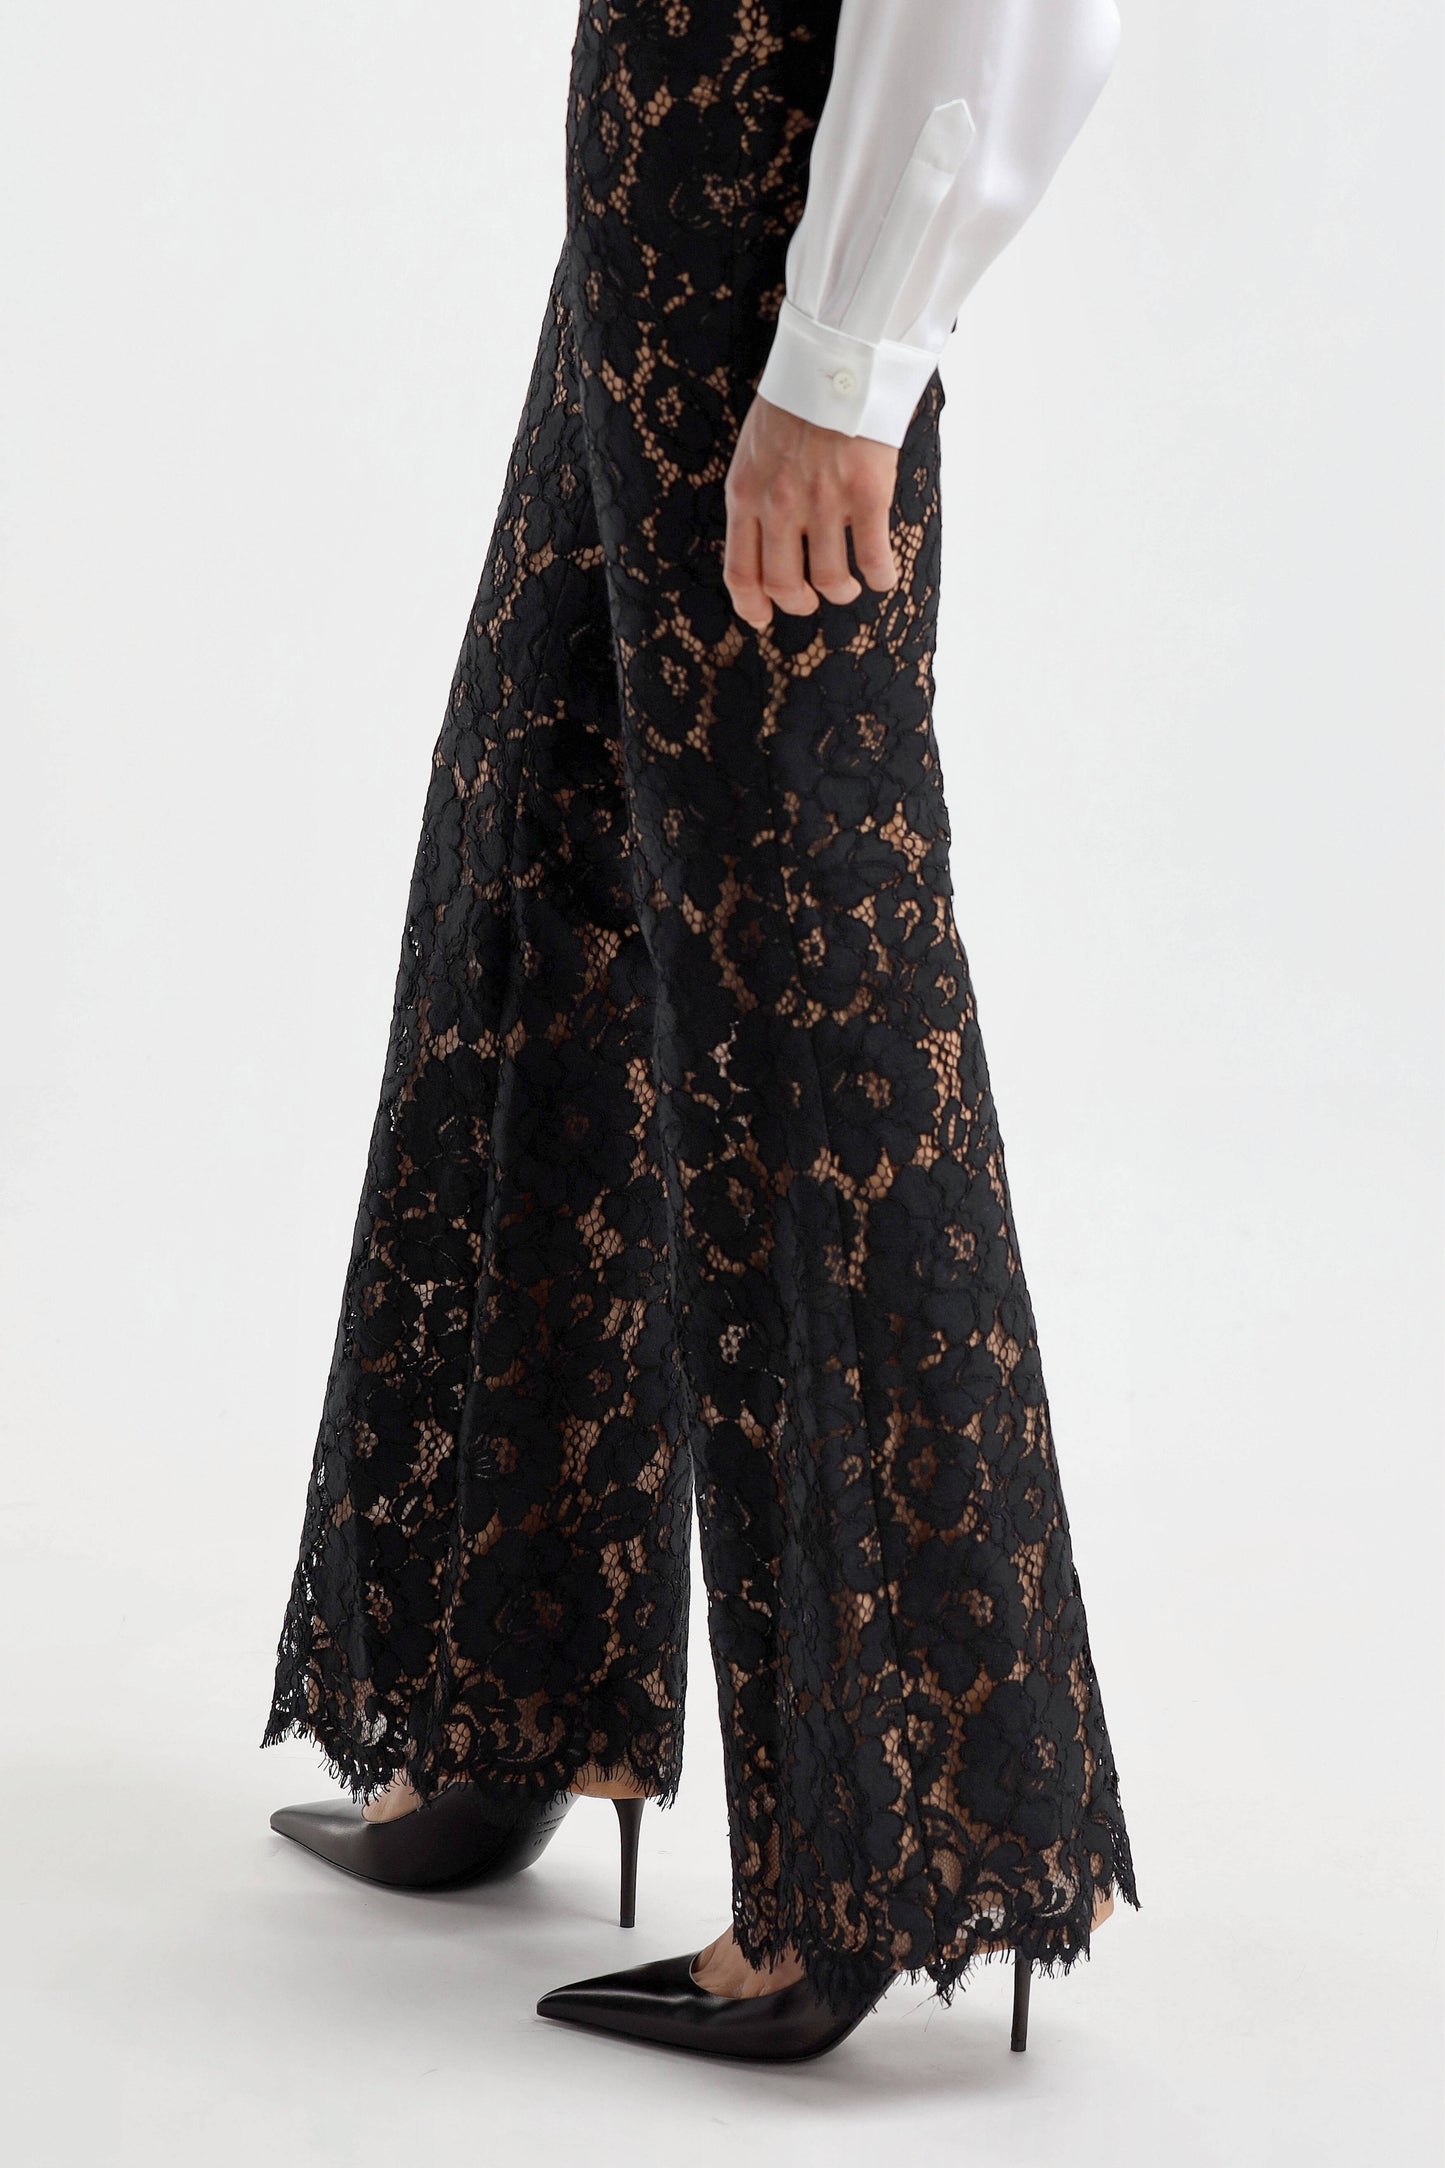 Hose Floral Lace in SchwarzMichael Kors Collection - Anita Hass